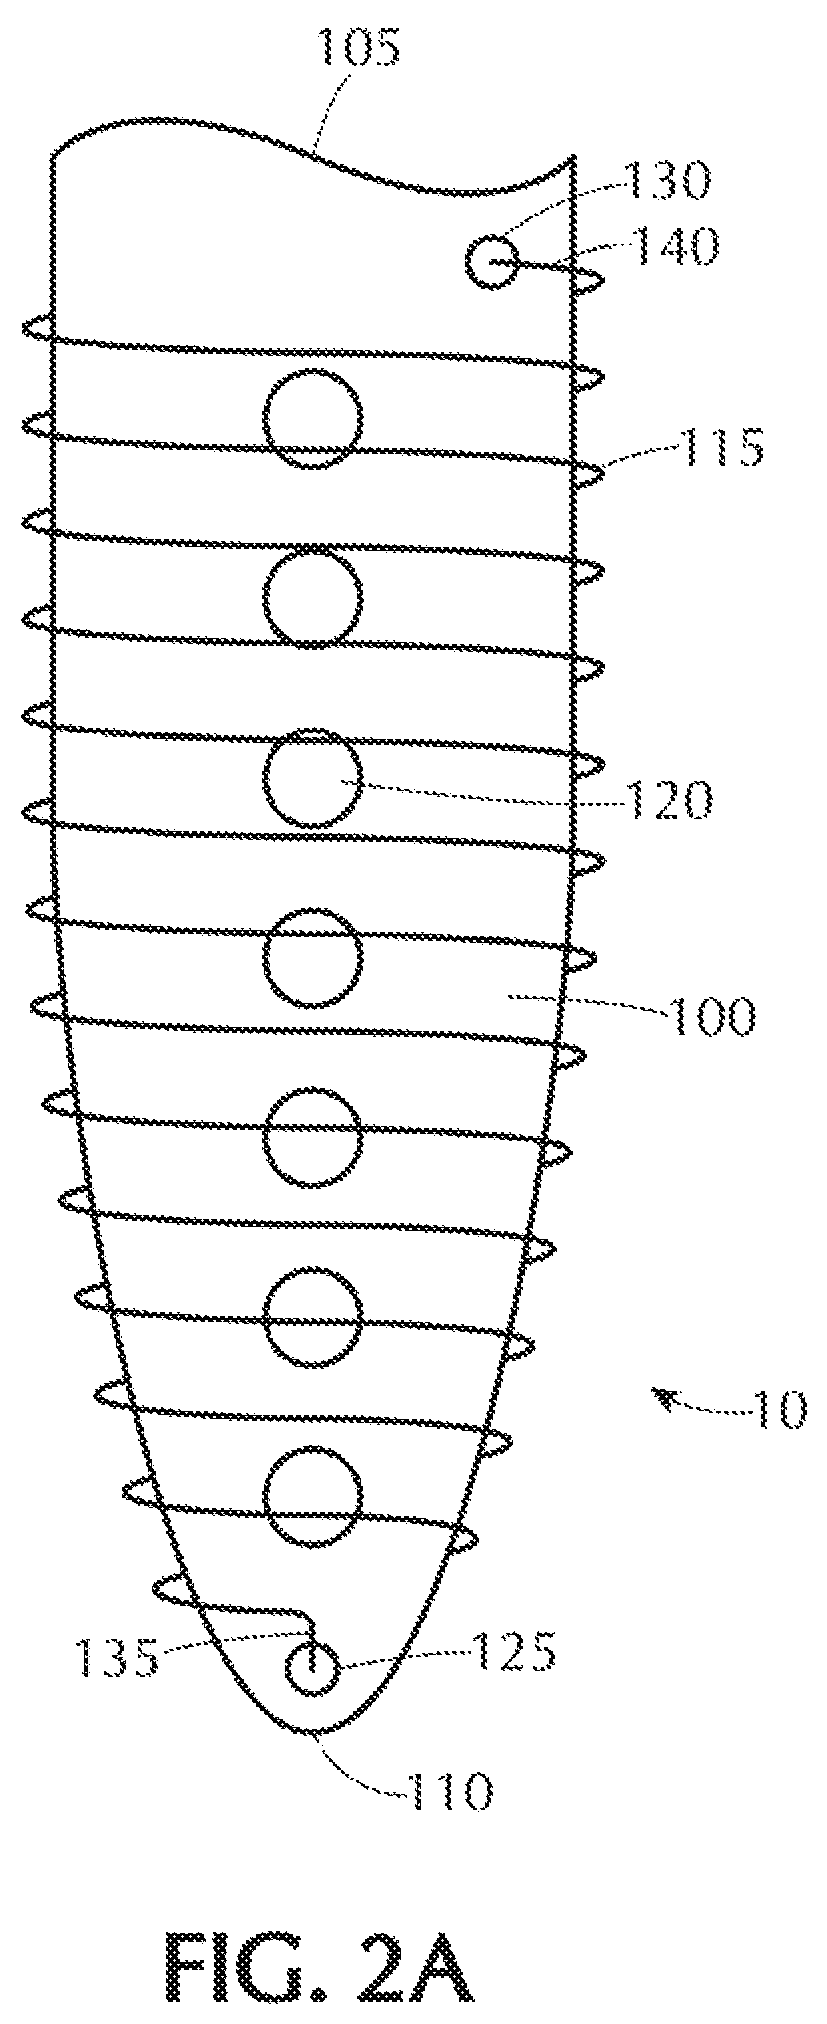 Self-offsetting implantable catheter system